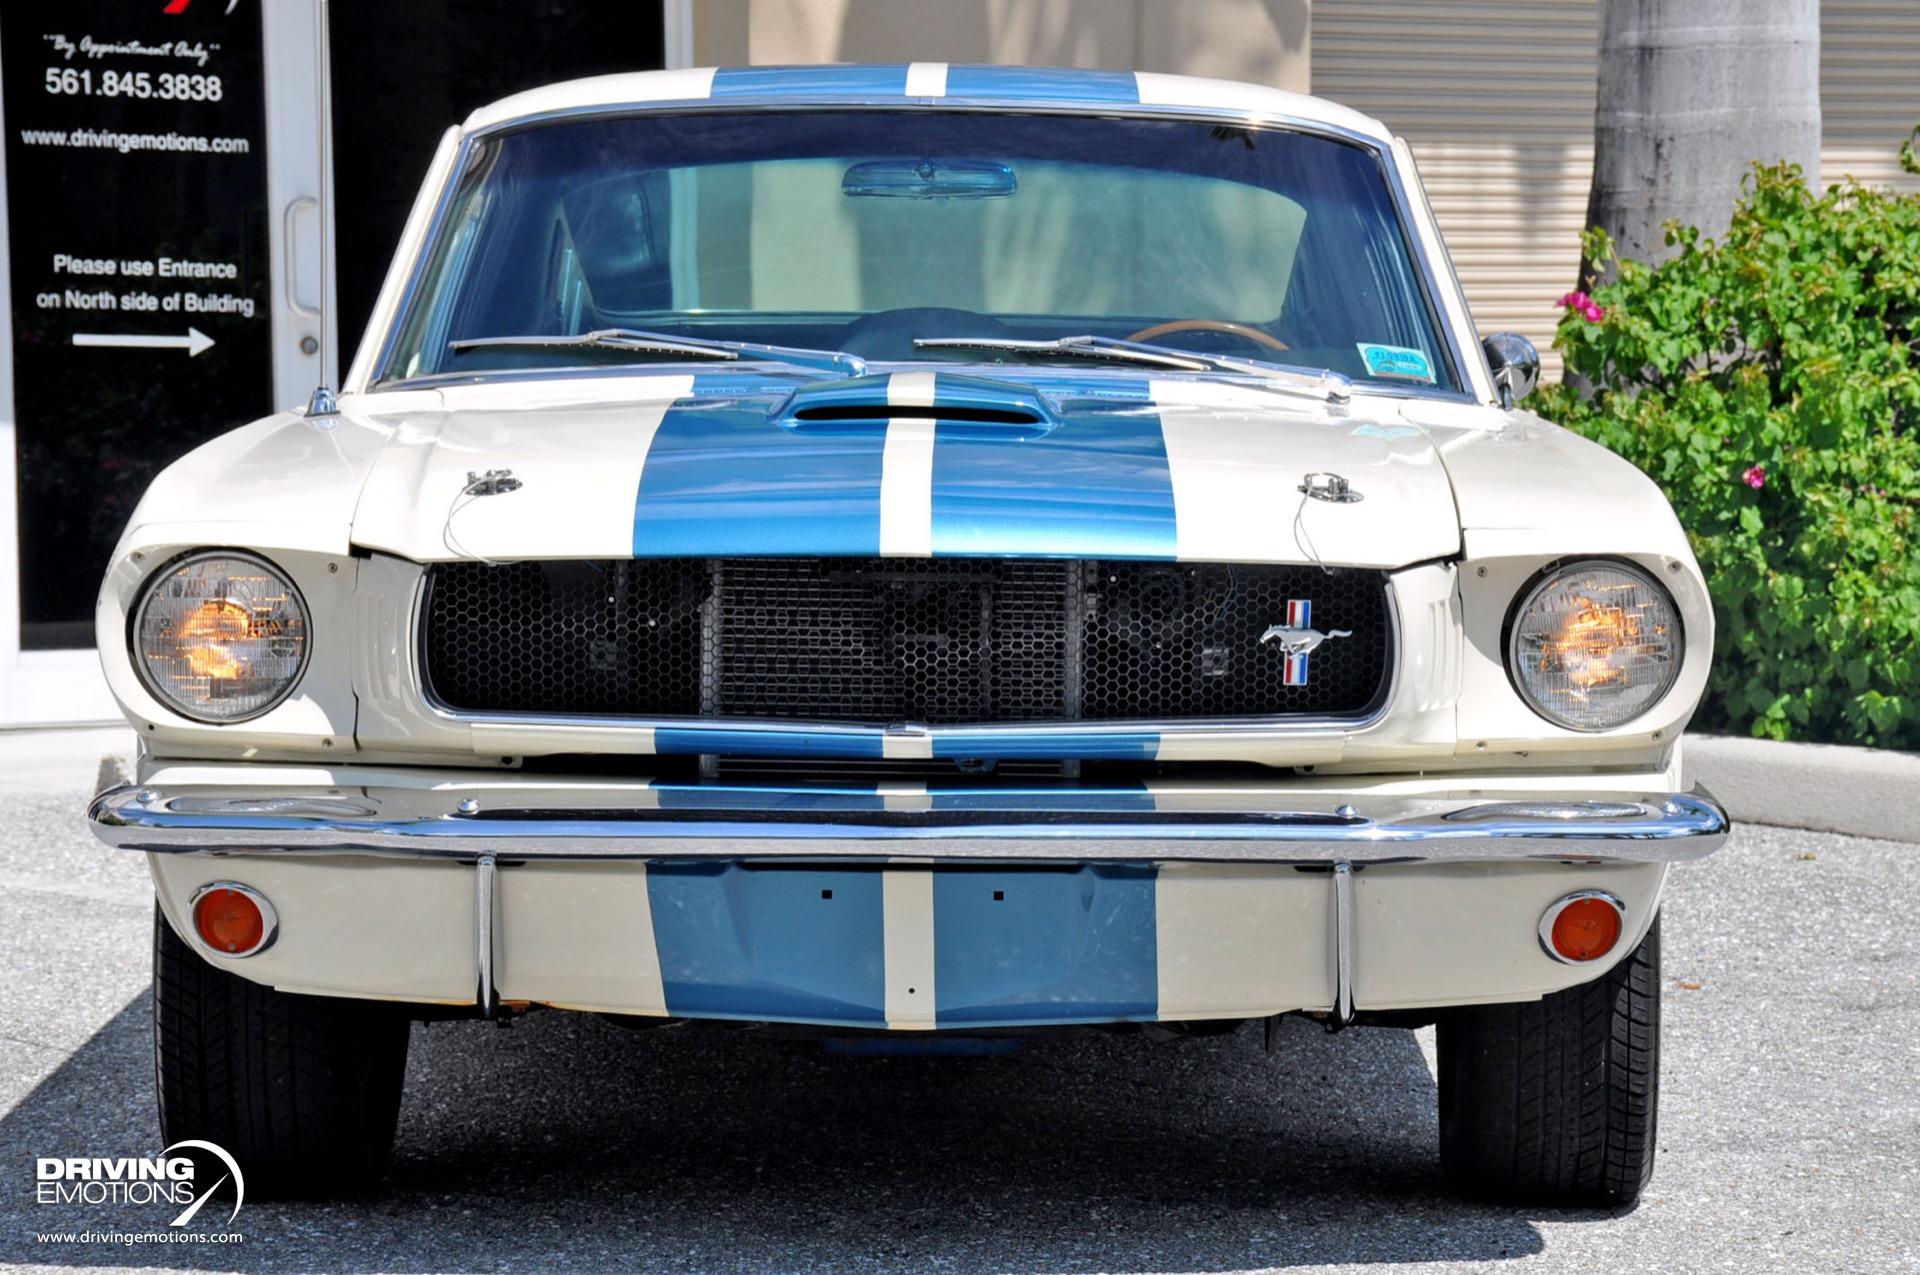 Used 1965 Ford Mustang GT350 Tribute Clone Mustang GT350 Tribute Clone | Lake Park, FL